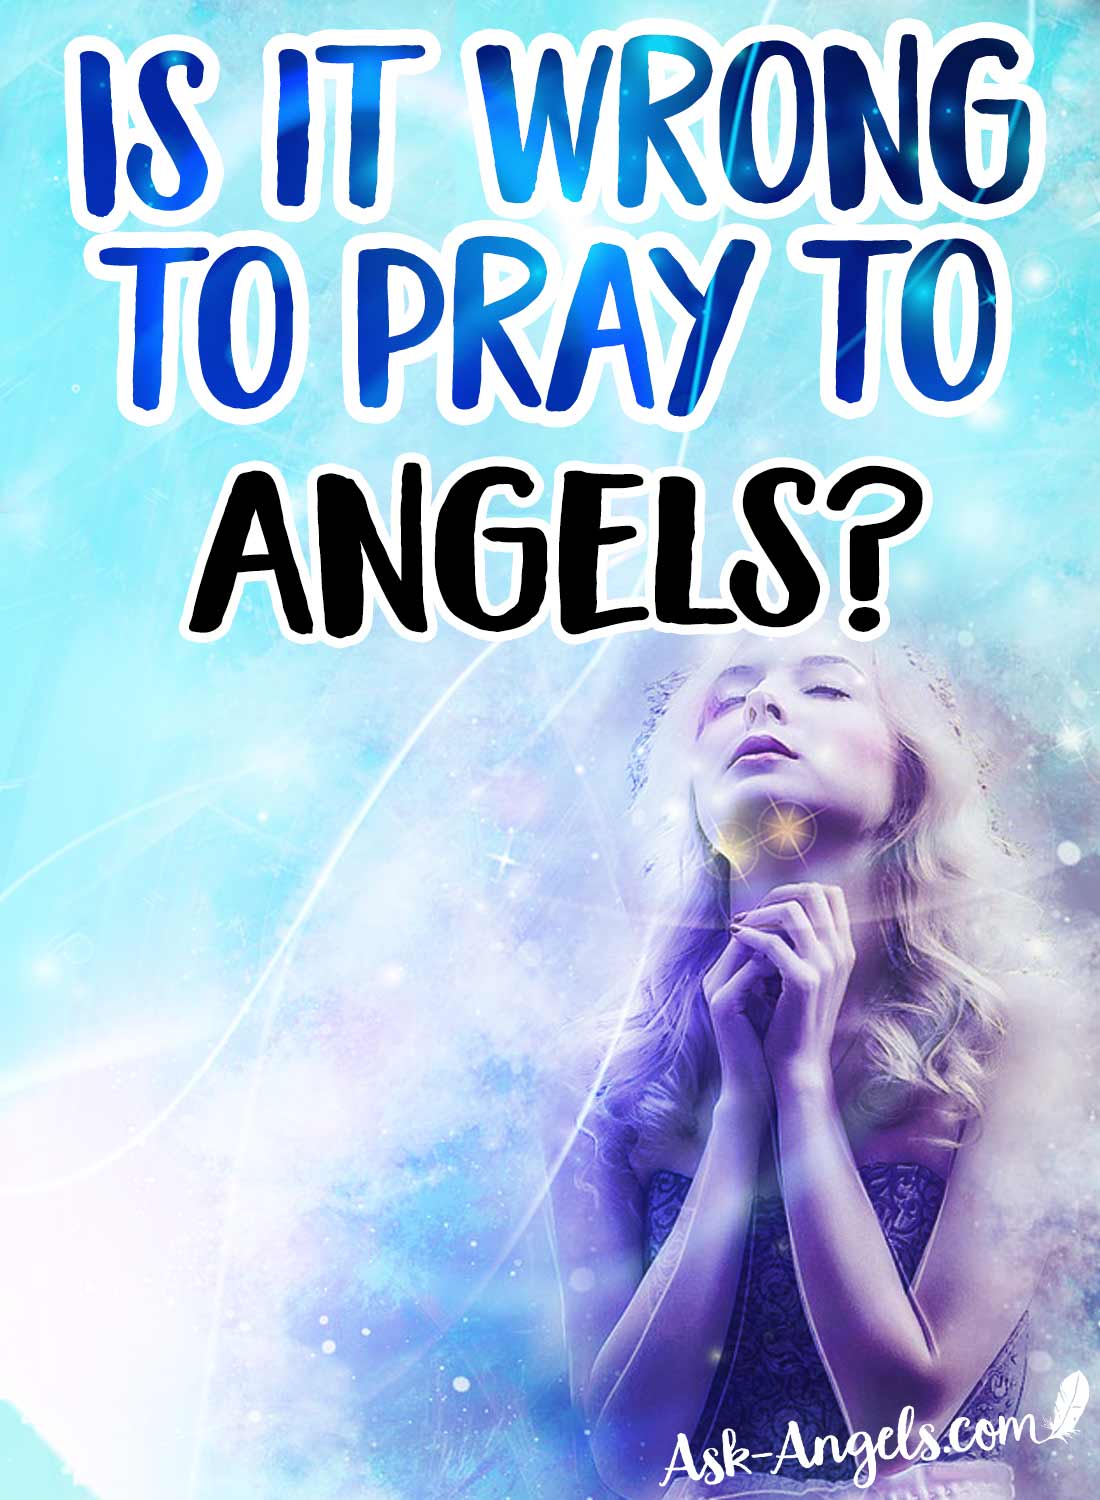 Is it wrong to pray to angels?